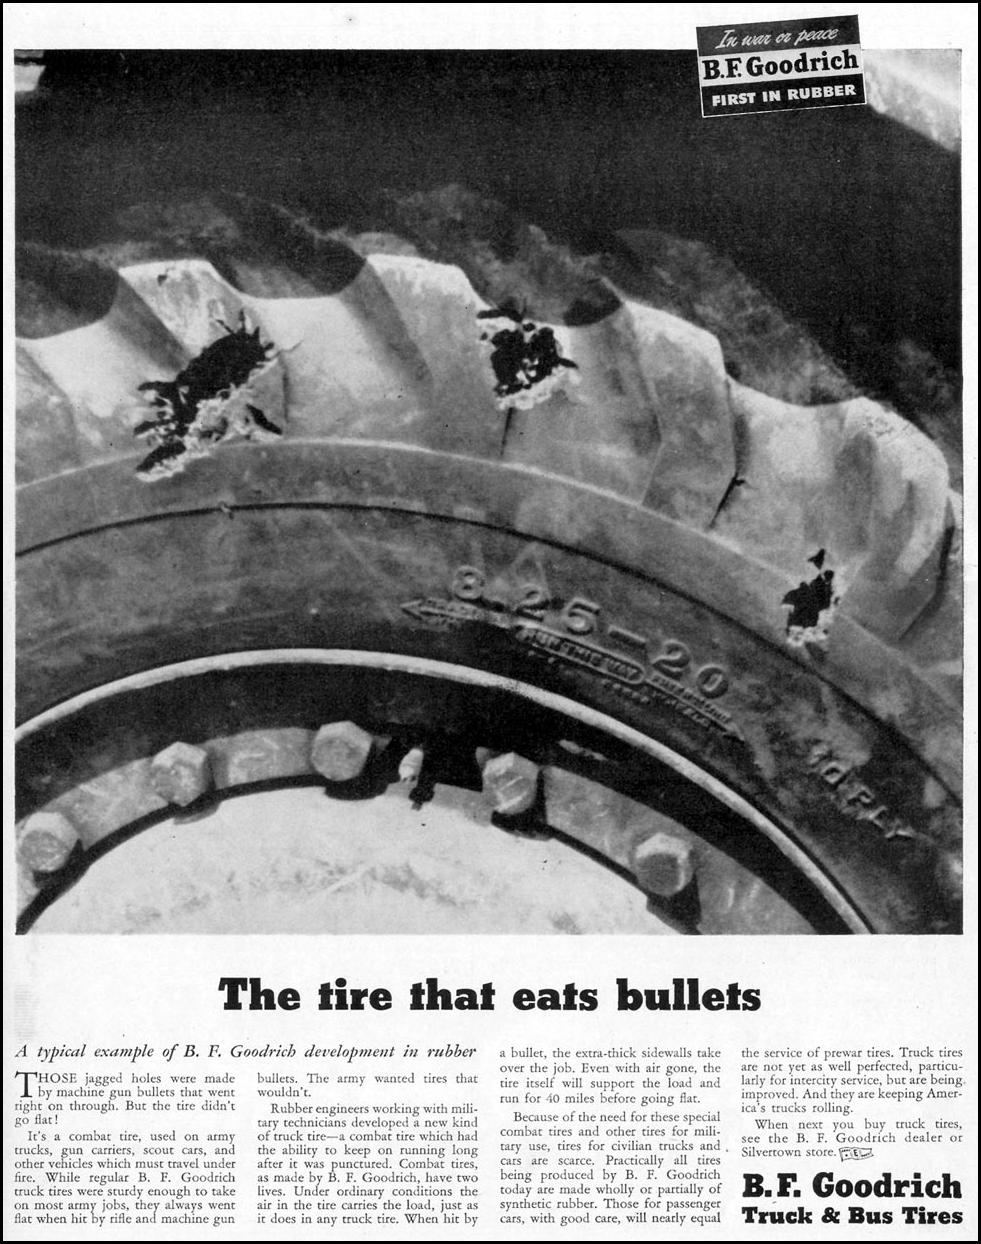 B. F. GOODRICH TRUCK AND BUS TIRES
LIFE
02/21/1944
p. 3